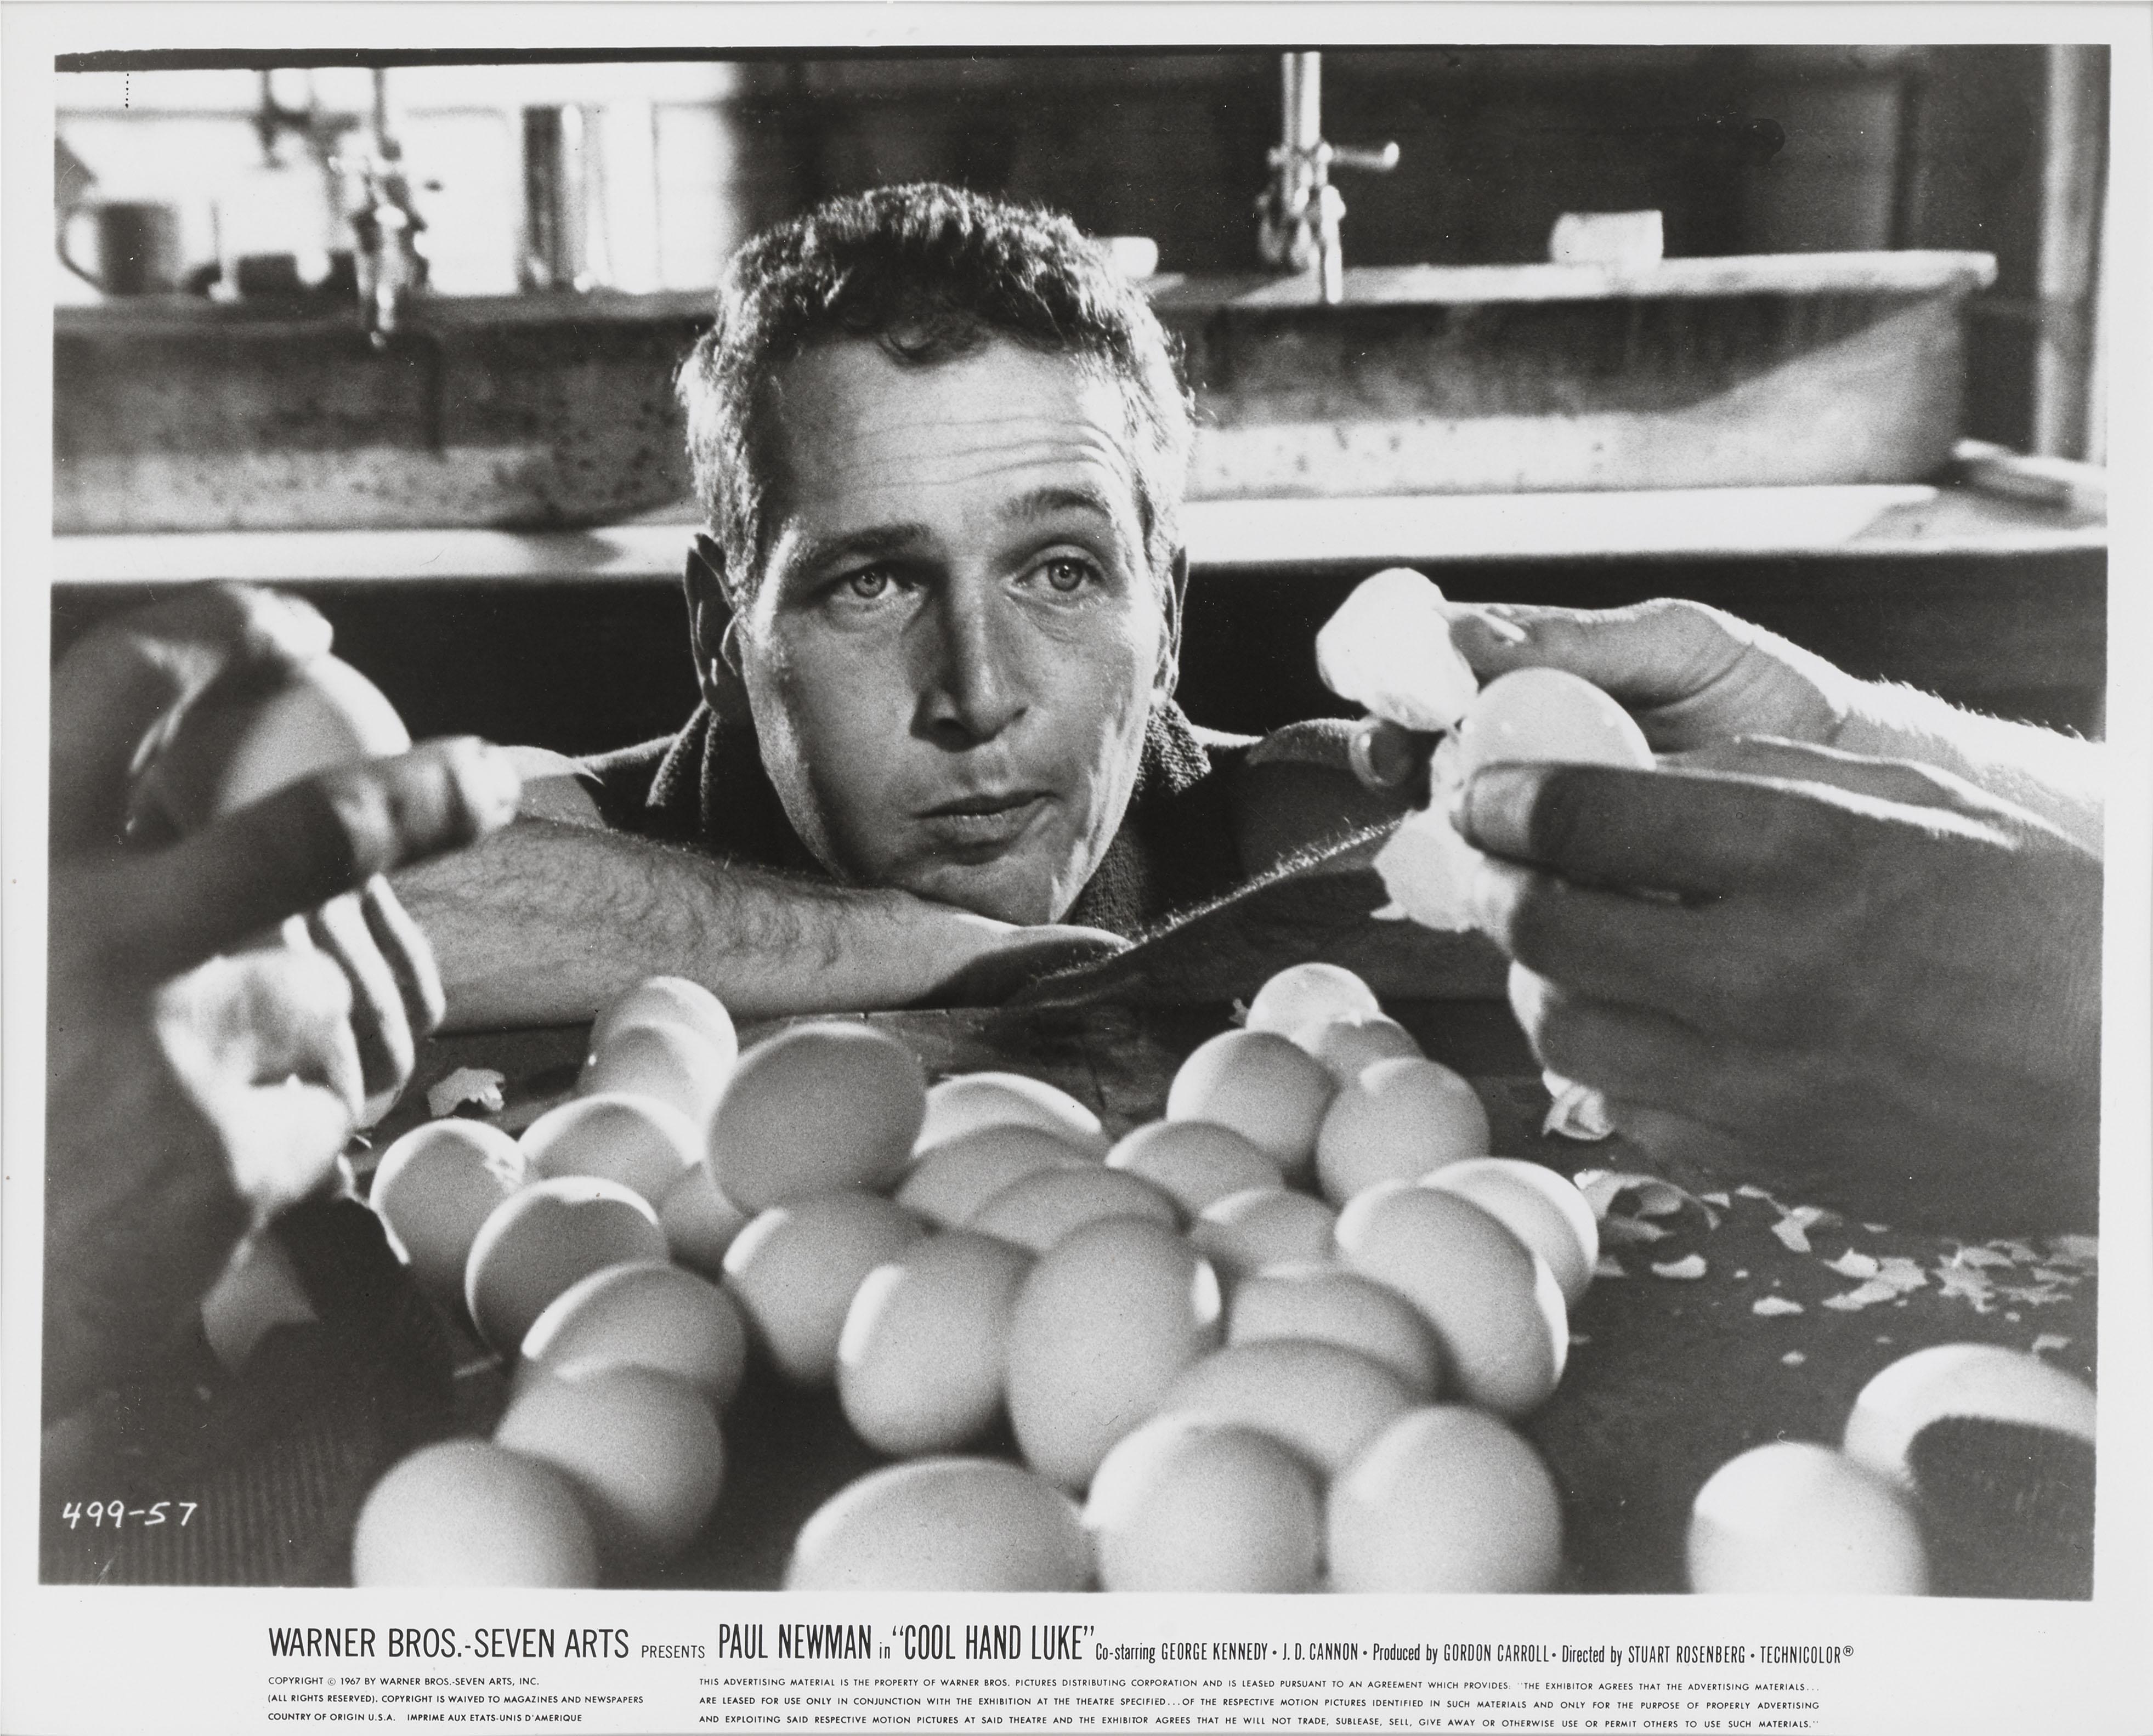 Original photographic production still.
This film was directed by Stuart Rosenberg, and stars Paul Newman and features George Kennedy, who won an Oscar for Best Supporting Actor. Newman had the leading role as Luke, who was sentenced to two years in